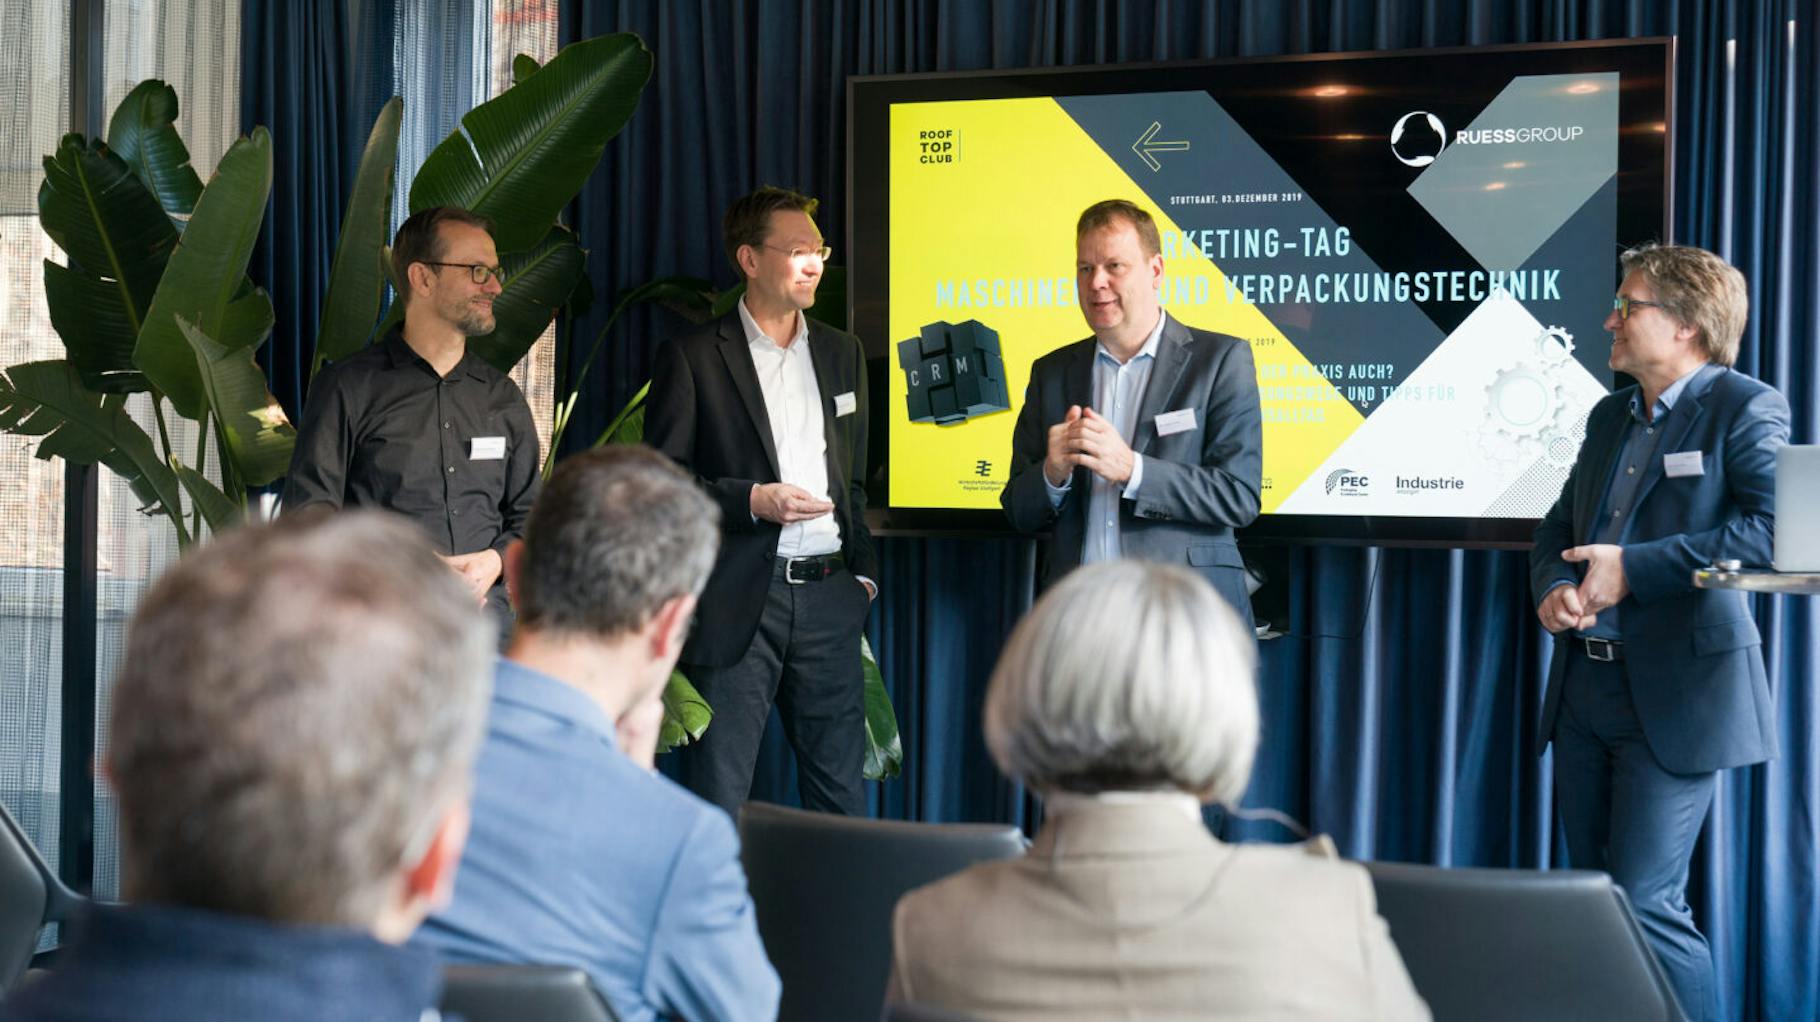 An industry in transition – Initiated by marketing agency Ruess Group together with the Packaging Excellence Center e. V. and Packaging Valley e. V.. Martin Buchwitz, Markus Rahner, Dr. Marc Funk and Steffen Ruess welcomed the 30 participants in the second Marketing Day for Mechanical Engineering and Packaging Technology (from left to right).